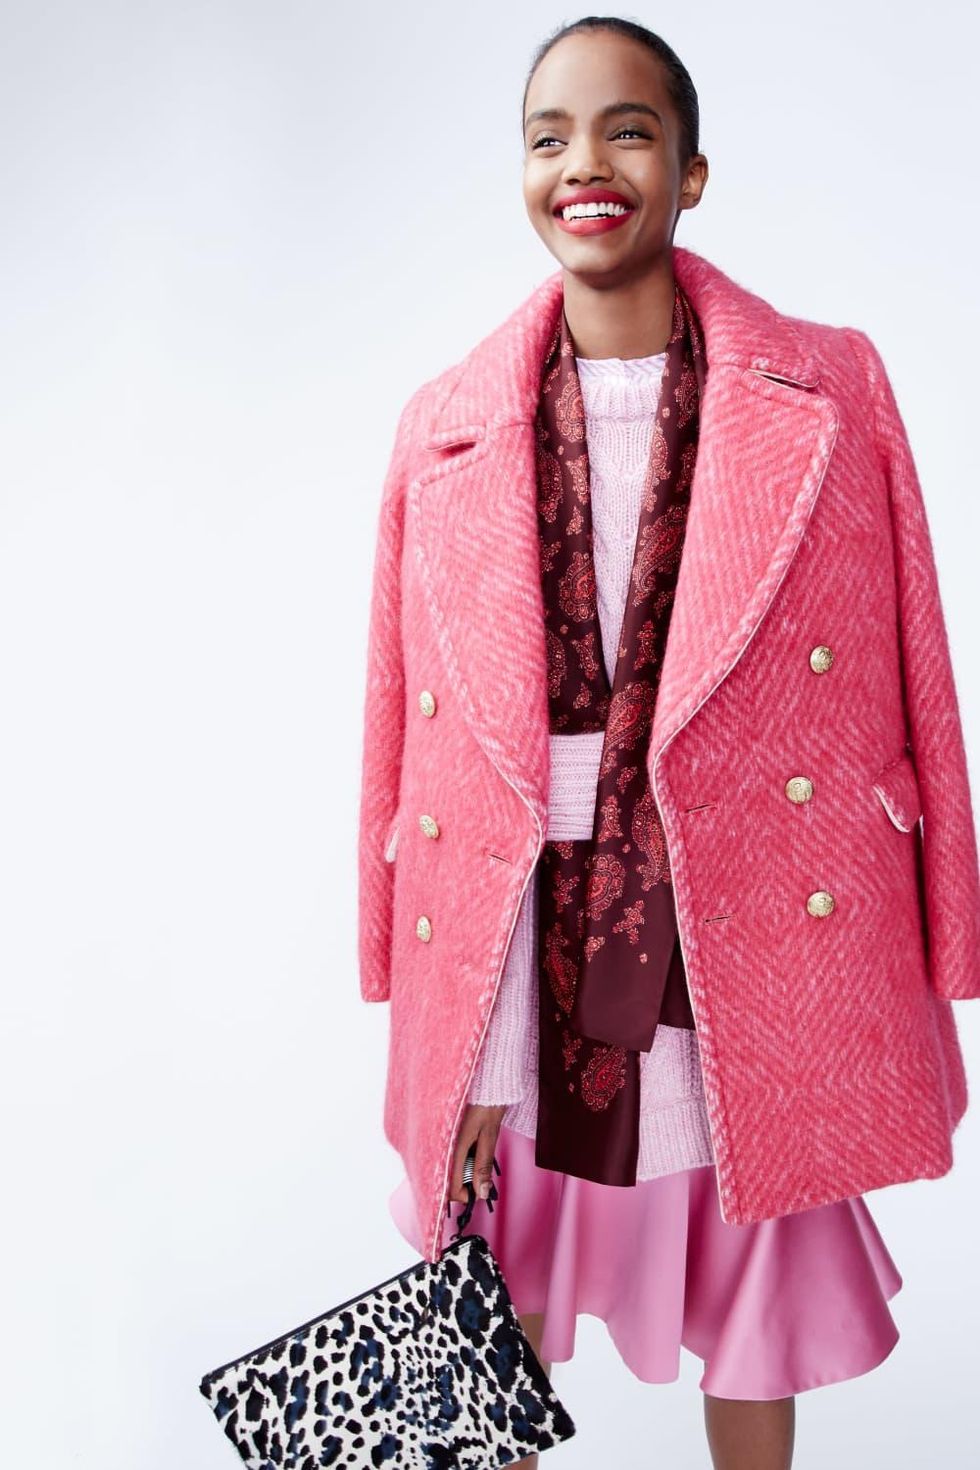 J Crew fall 2016 collection women